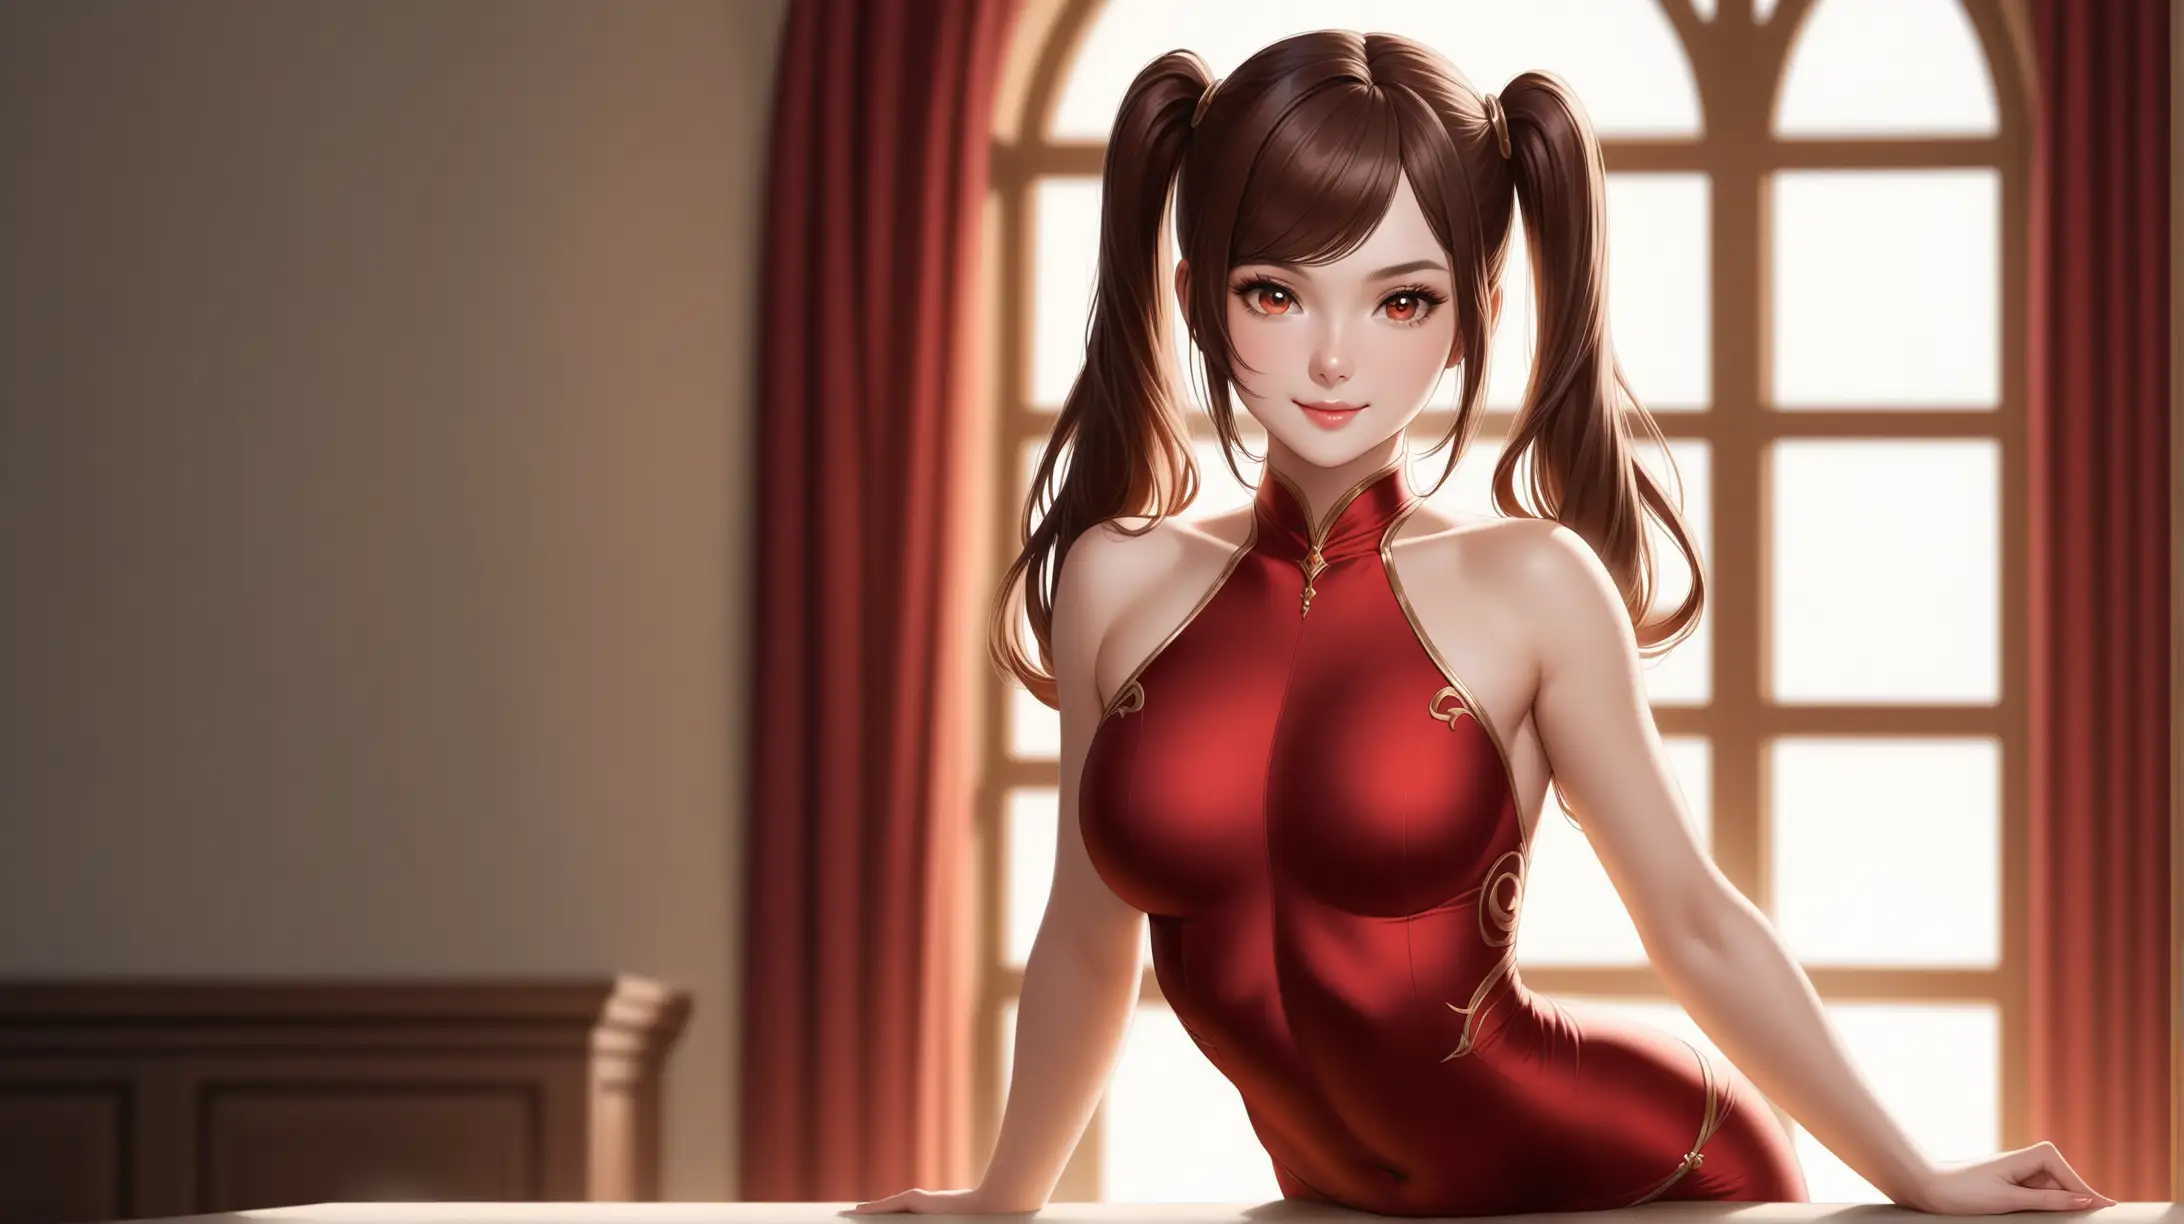 Draw a woman, very long reddish-brown hair, twintails that go past hips, side locks, side-swept bangs, scarlet eyes, perky figure, high quality, realistic, accurate, detailed, long shot, natural lighting, indoors, seductive pose, outfit inspired from Genshin Impact, smiling at the viewer